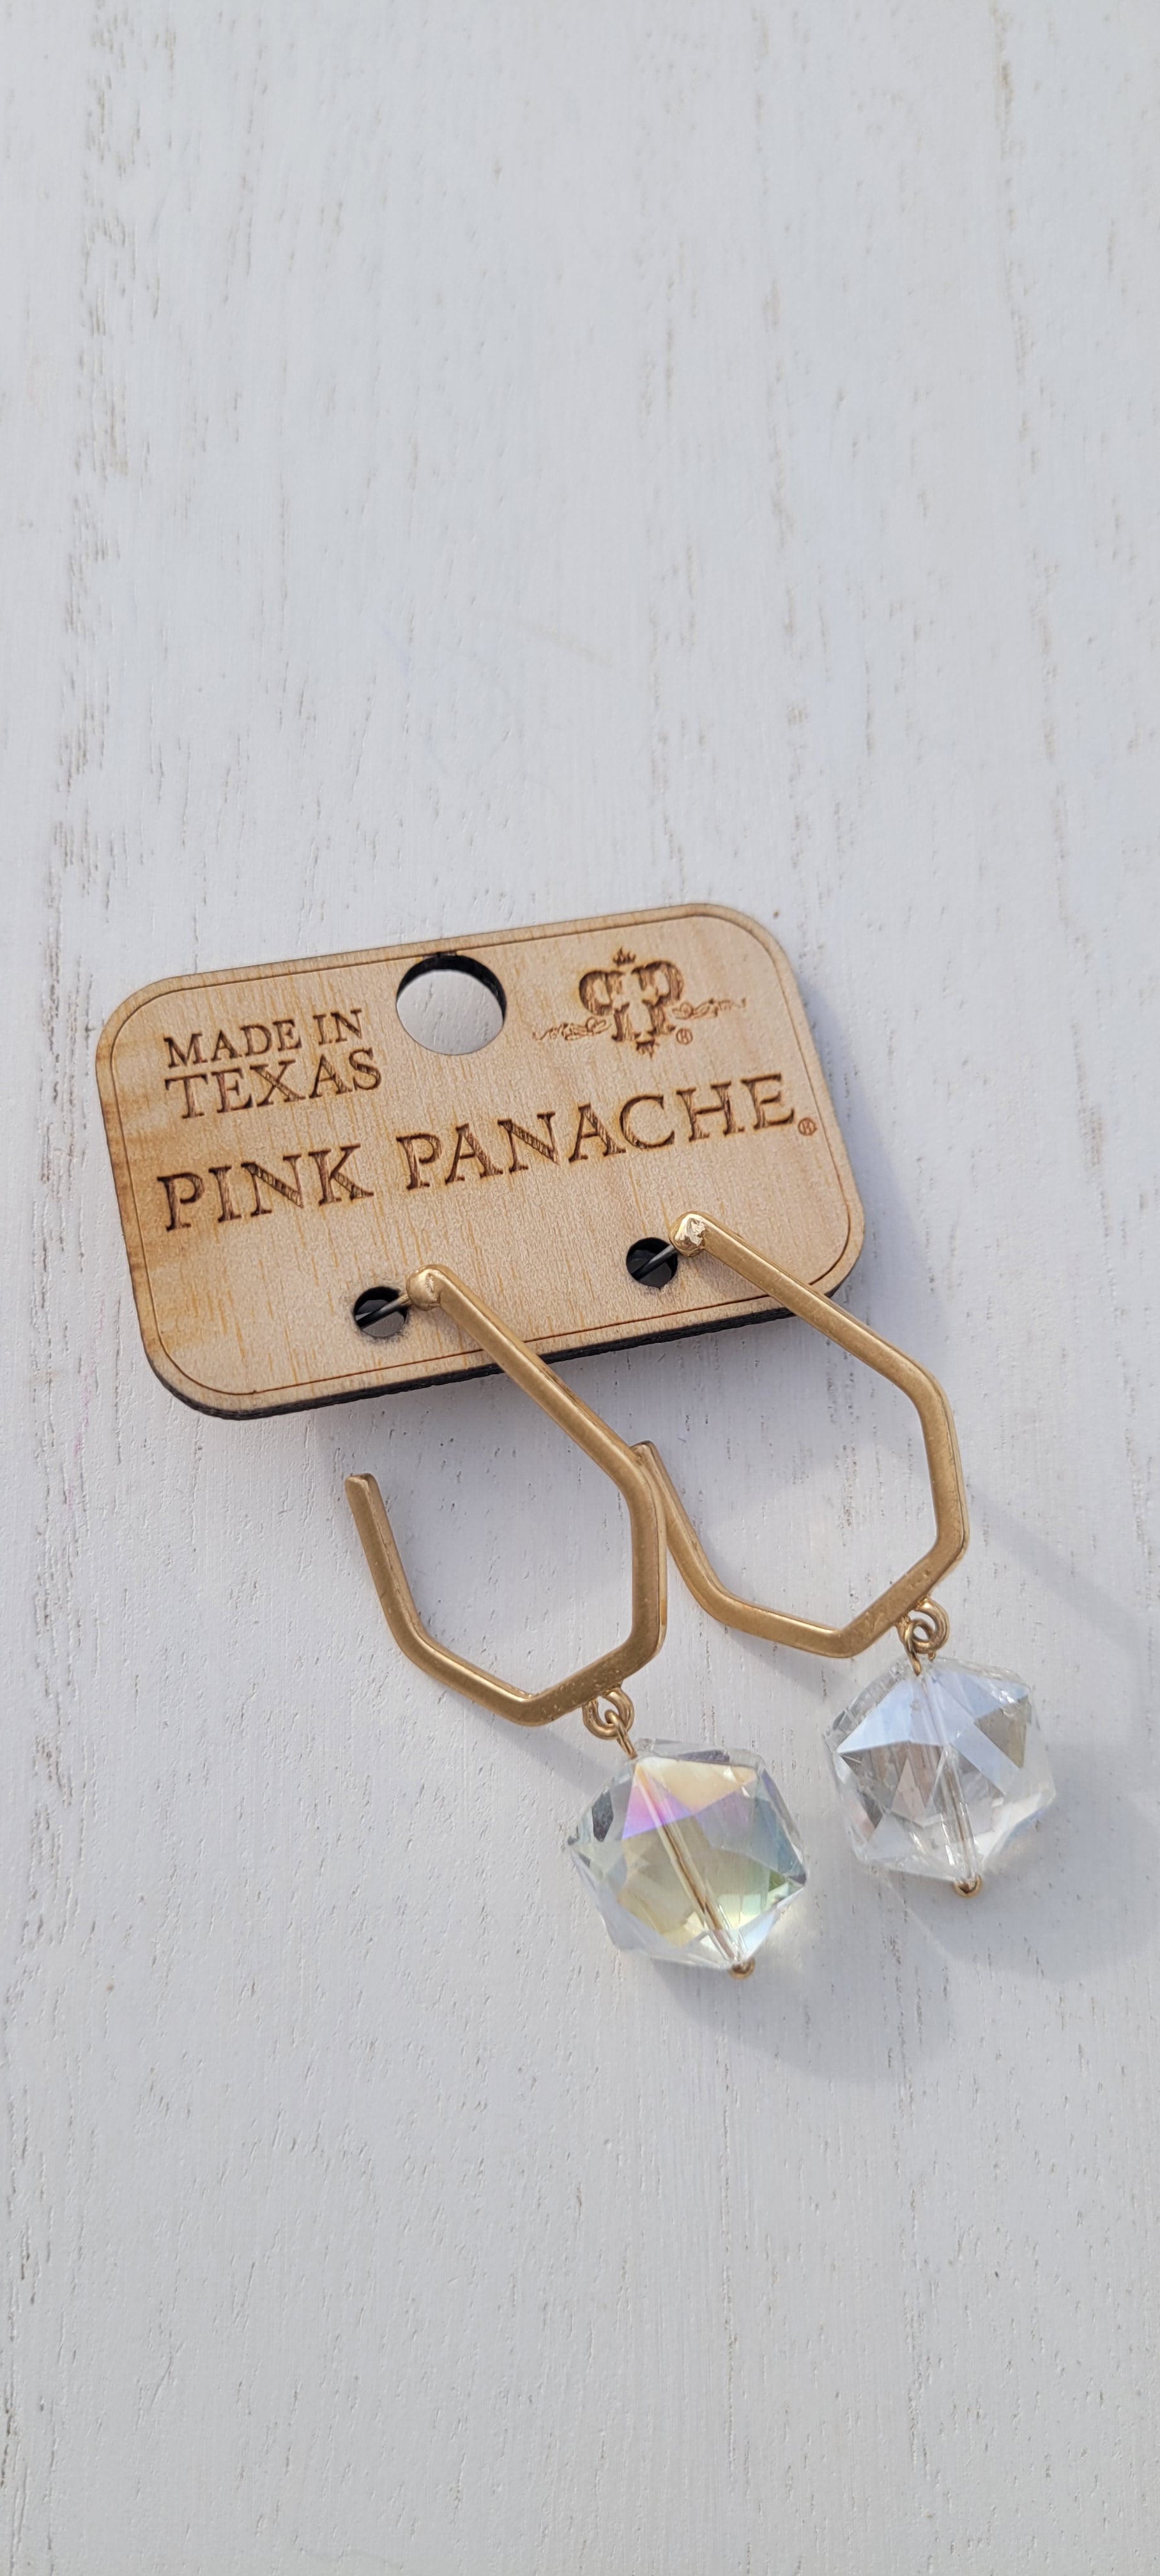 Pink Panache Earrings Color: Clear hexagon shape crystal on gold geometric hoop earring Limited supply!